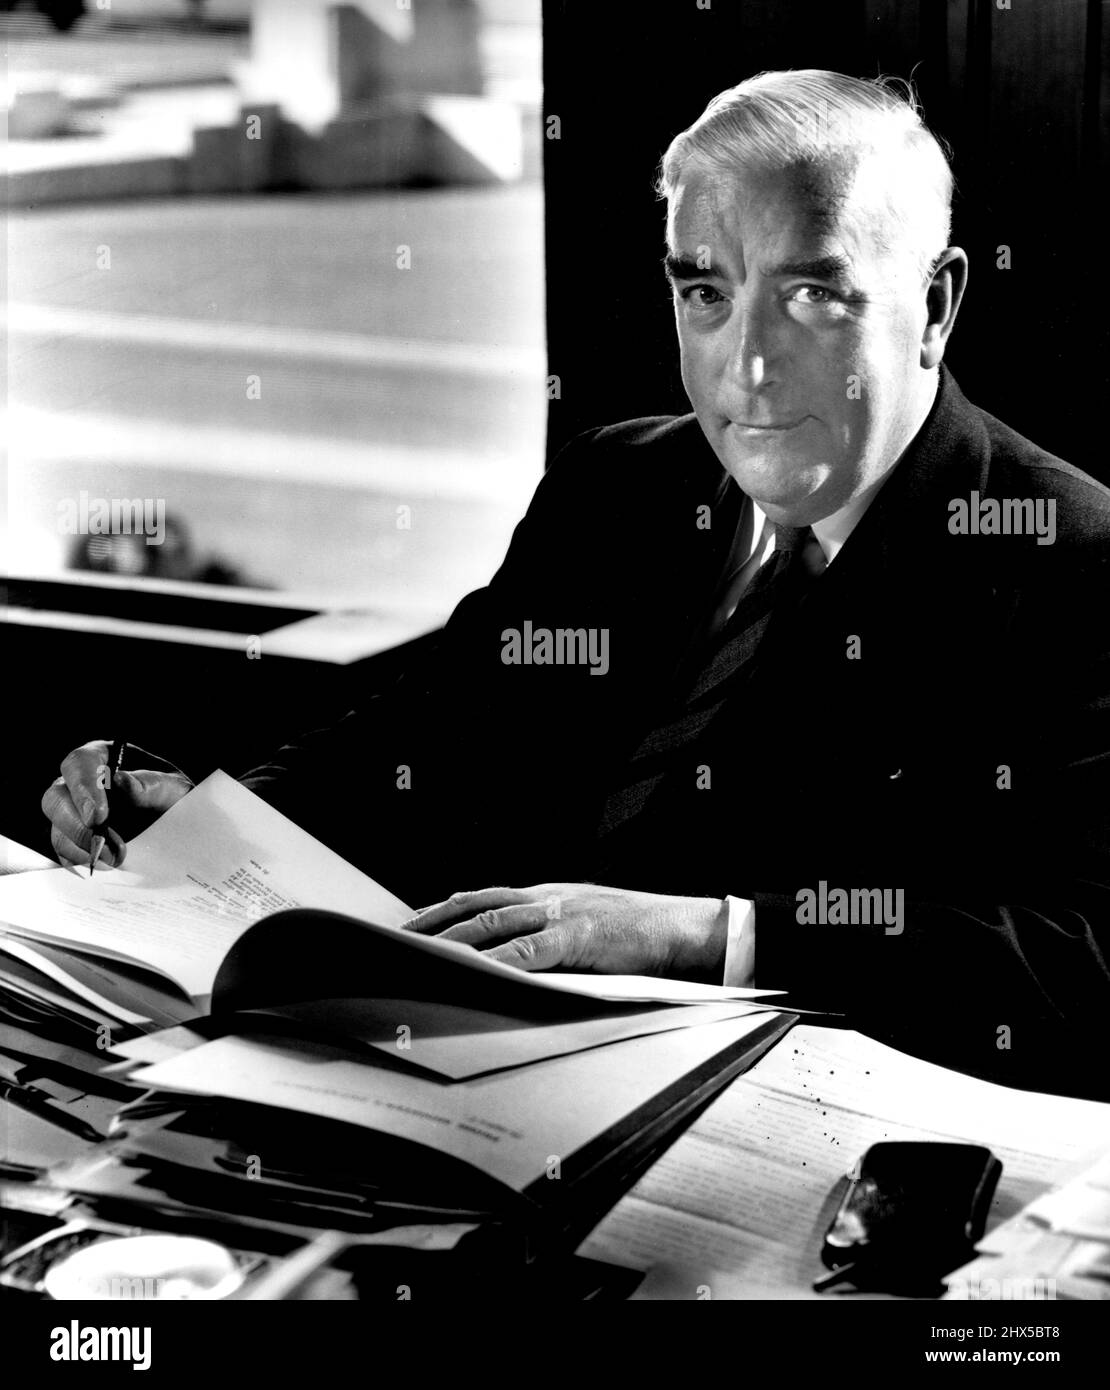 [Sir] Robert Menzies, at Parliament House, Canberra for The Times, London. Sir Robert Menzies (1894-1978) served twice as Prime Minister of Australia: from 1939 to 1941 as leader of the United Australia Party and from 1949 to 1966 as leader of the Liberal-Country Coalition. Max Dupain and Kerry Dundas travelled to Canberra to photograph Menzies after his election for his second term as leader of the Liberal-Country Coalition. Menzies retired in 1966 and was succeeded by Harold Holt. November 1, 1951. (Photo by Max Dupain). Stock Photo